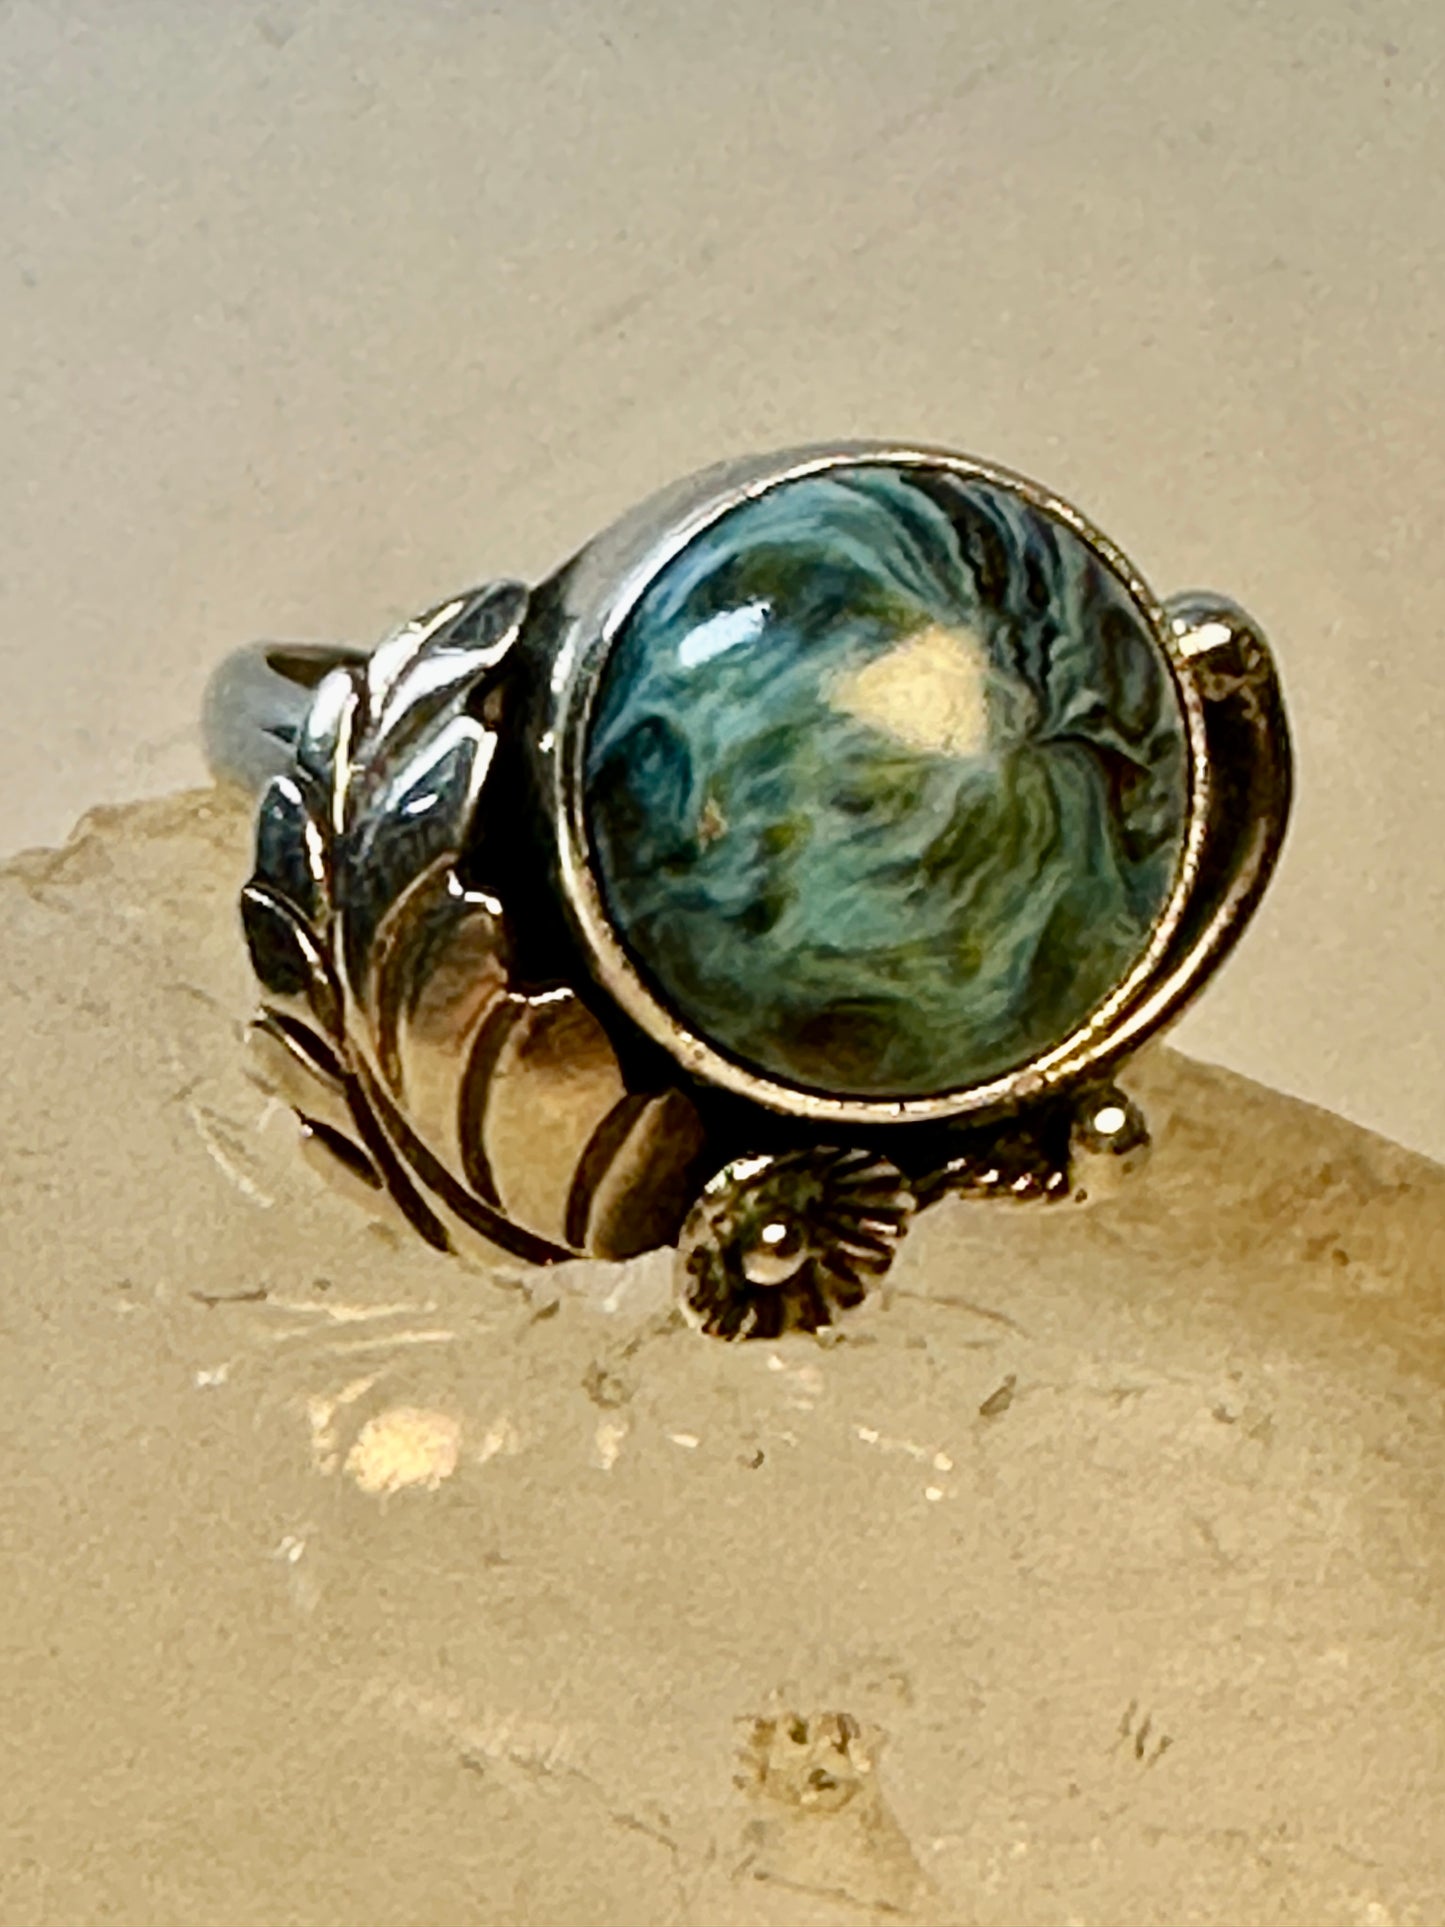 Navajo ring mystery blue stone size 6 sterling silver leaves or feathers women girls